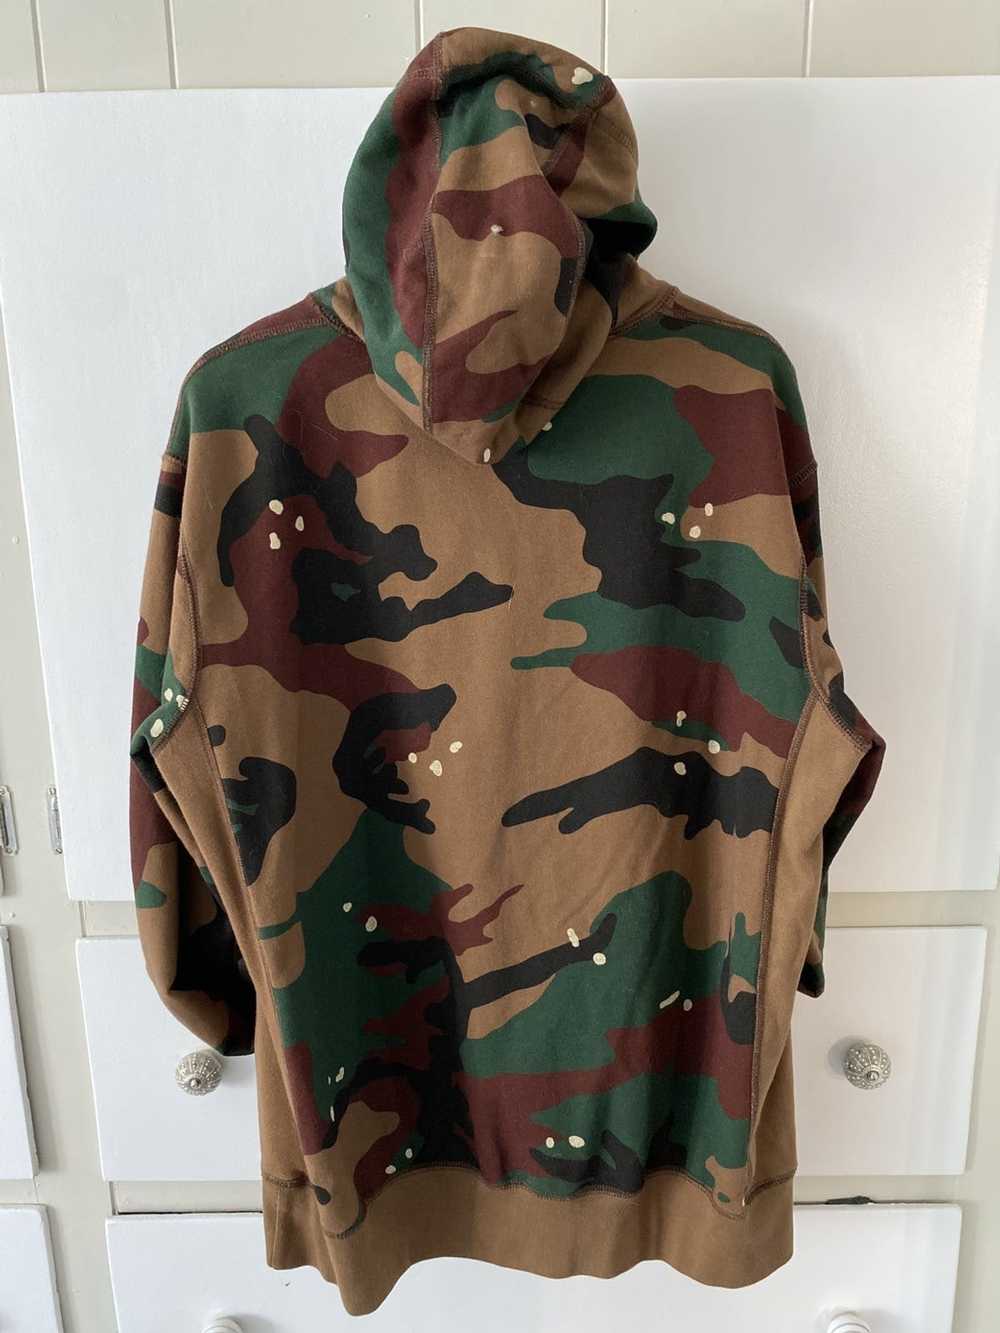 Raised By Wolves RBW Camo Hoodie - image 2